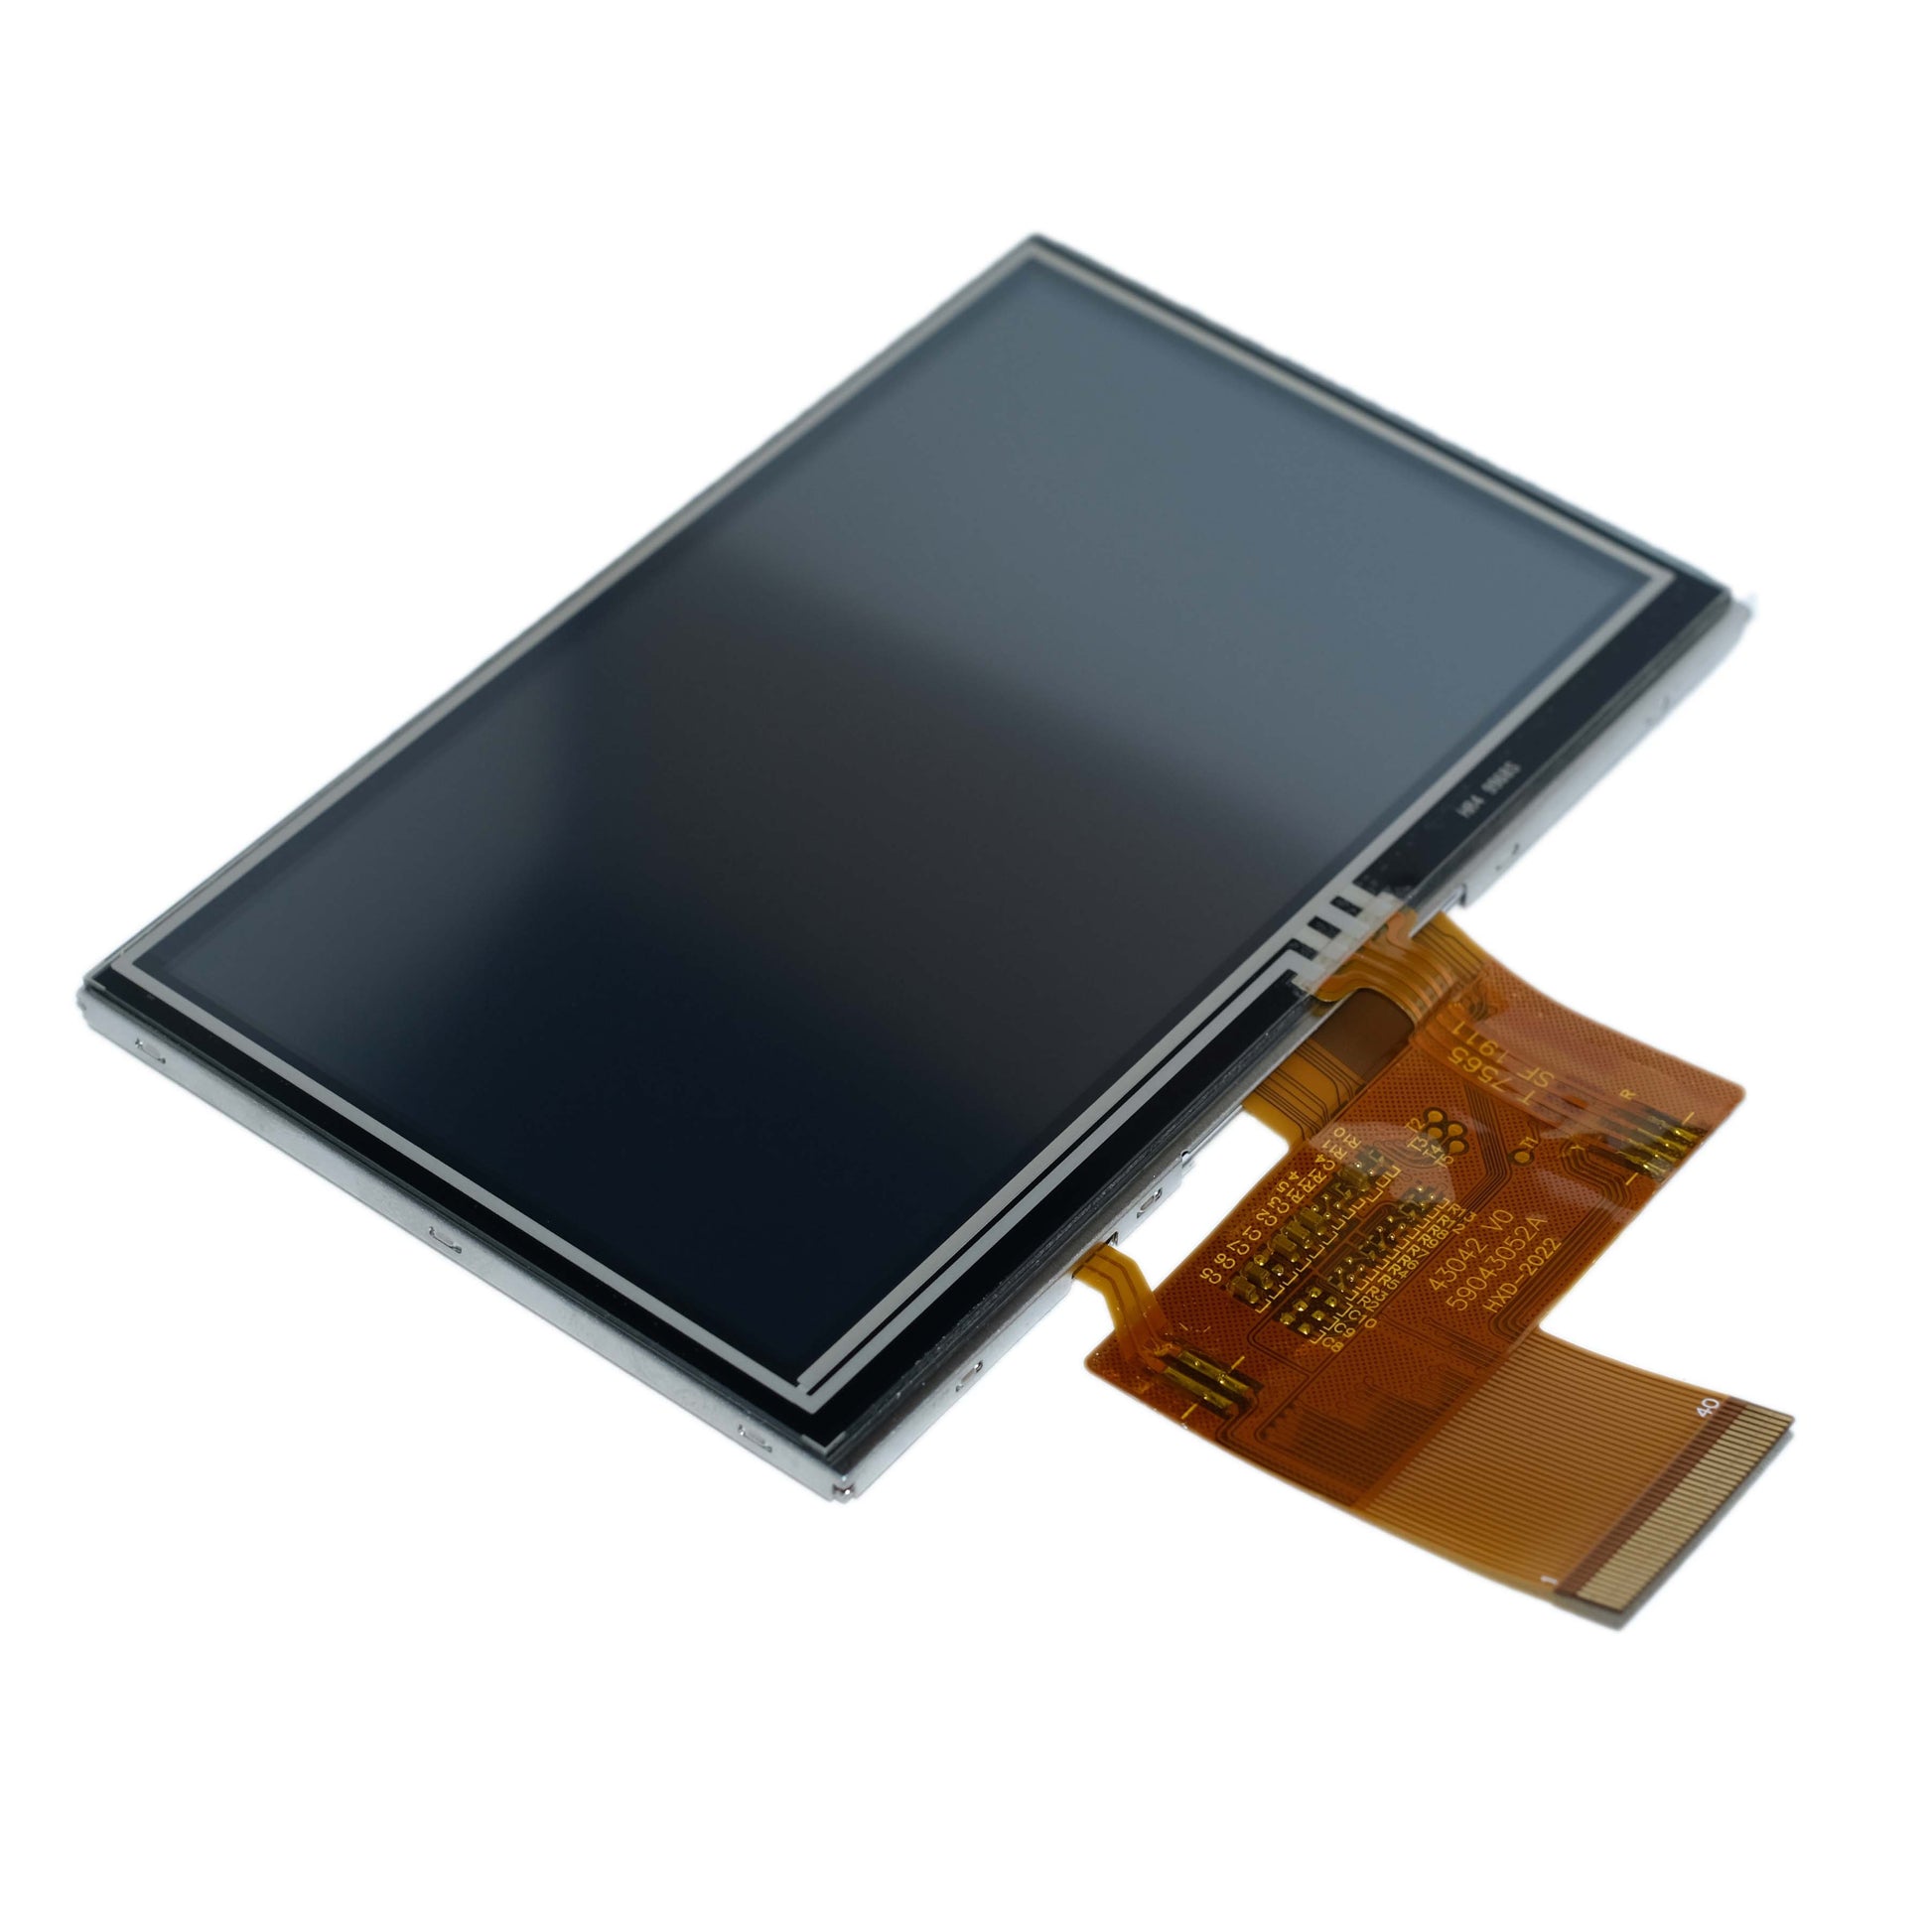 top view of 4.3-inch IPS display panel with 480x272 resolution